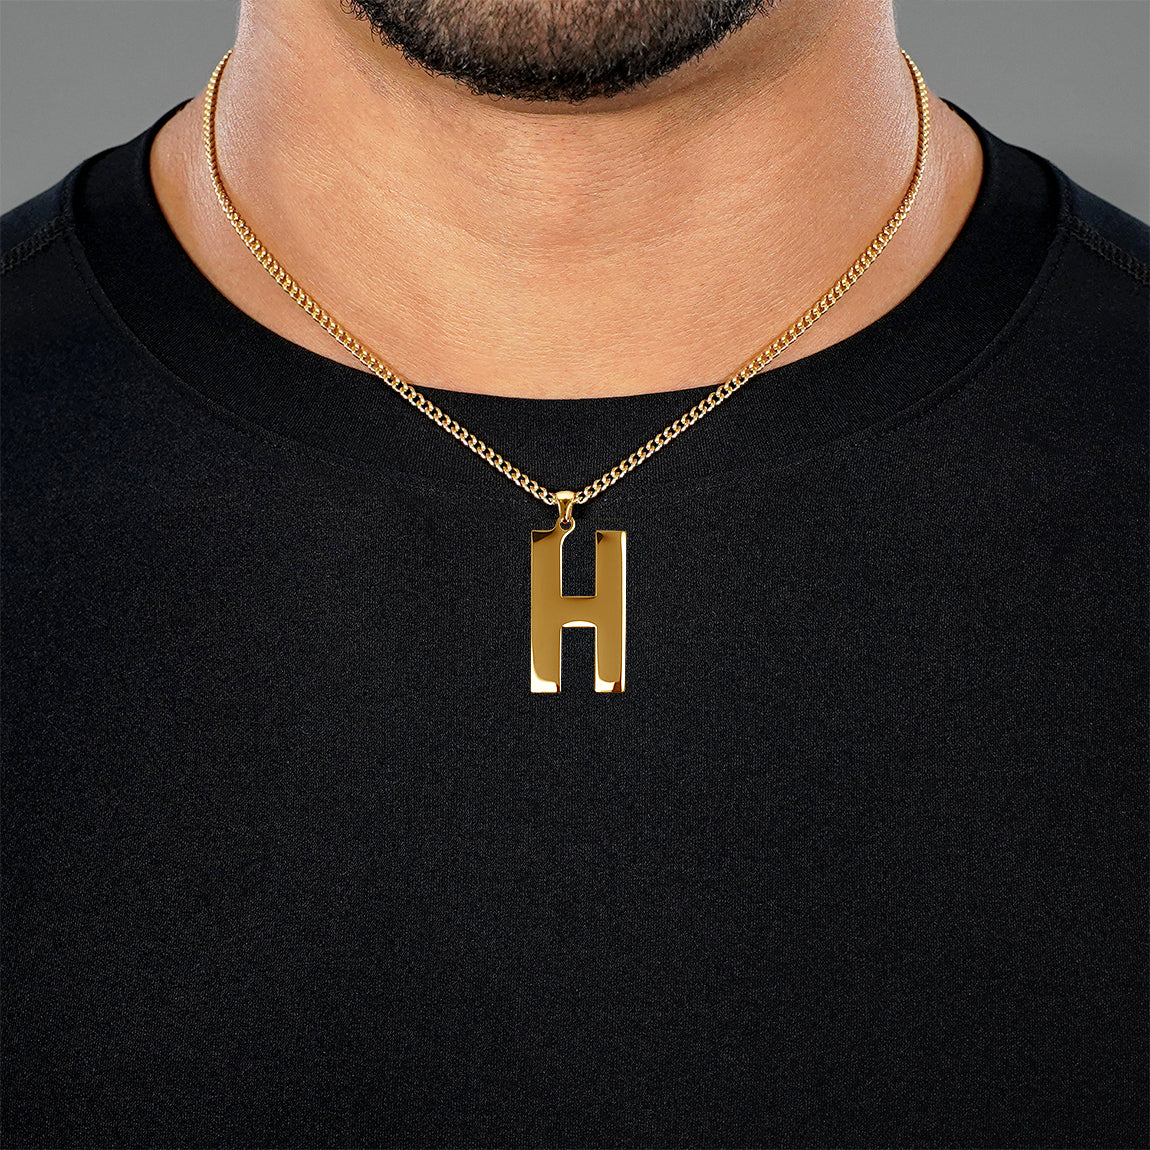 H Letter Pendant with Chain Necklace - Gold Plated Stainless Steel